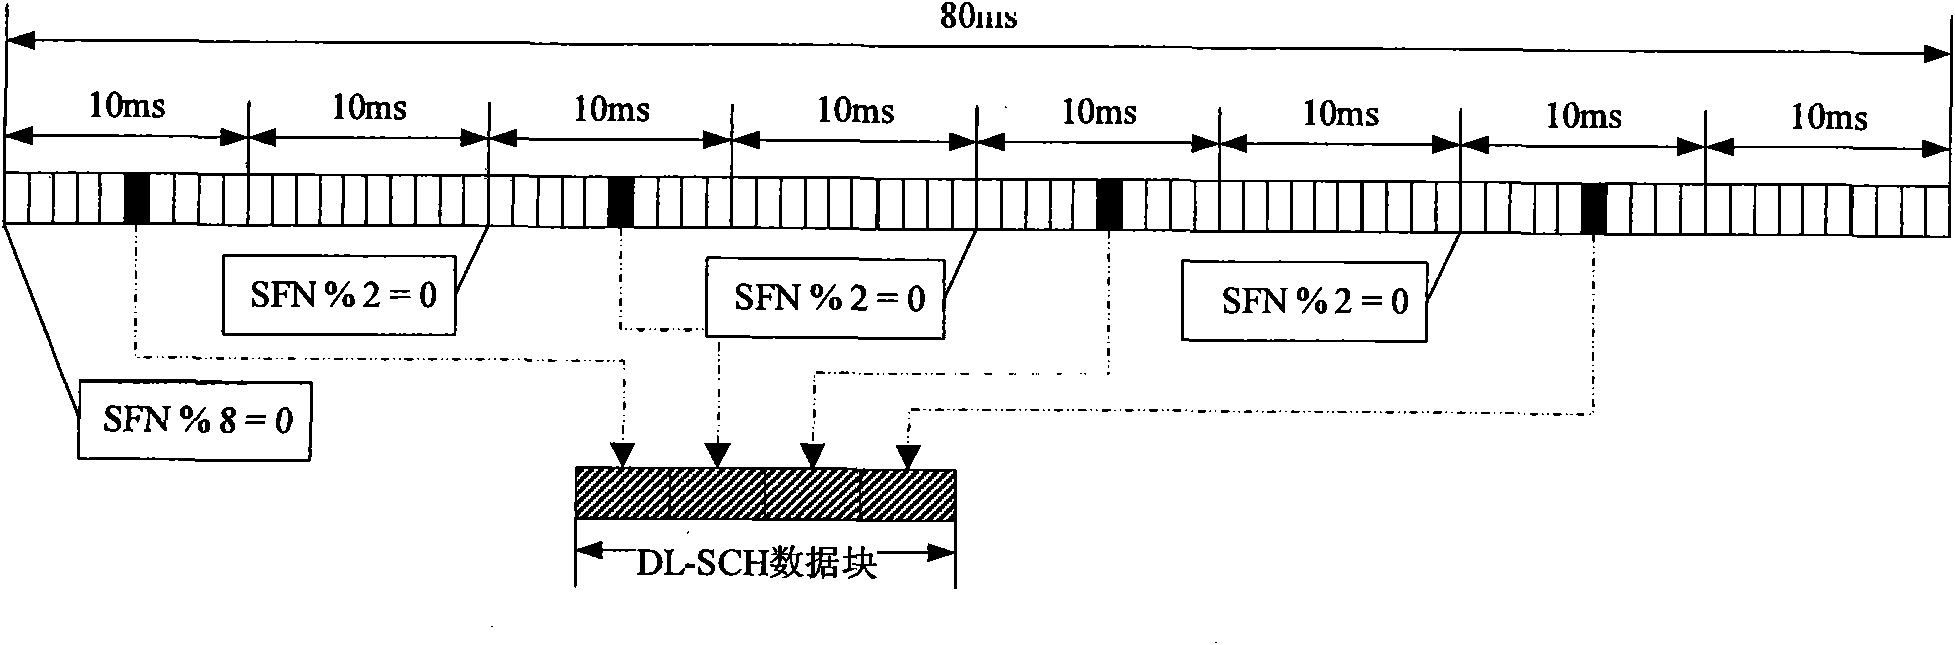 Method for interpreting system messages by LTE (Long Term Evolution) terminal